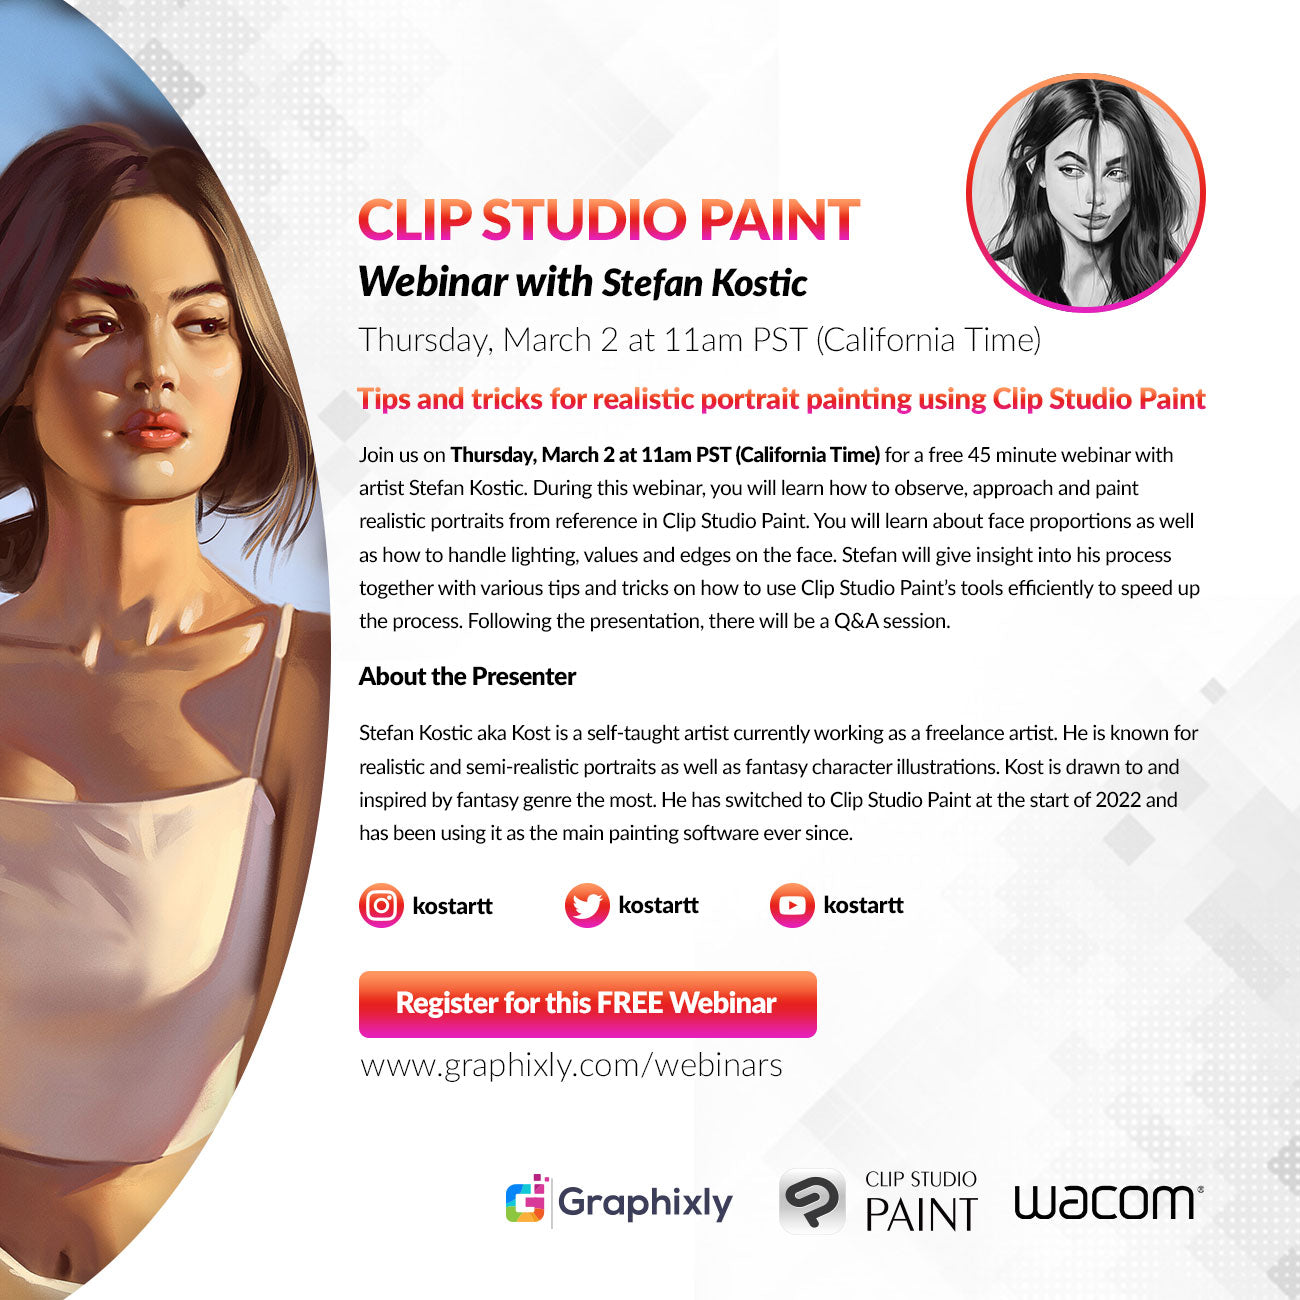 Webinar – Tips and tricks for realistic portrait painting using Clip Studio Paint with Stefan Kostic